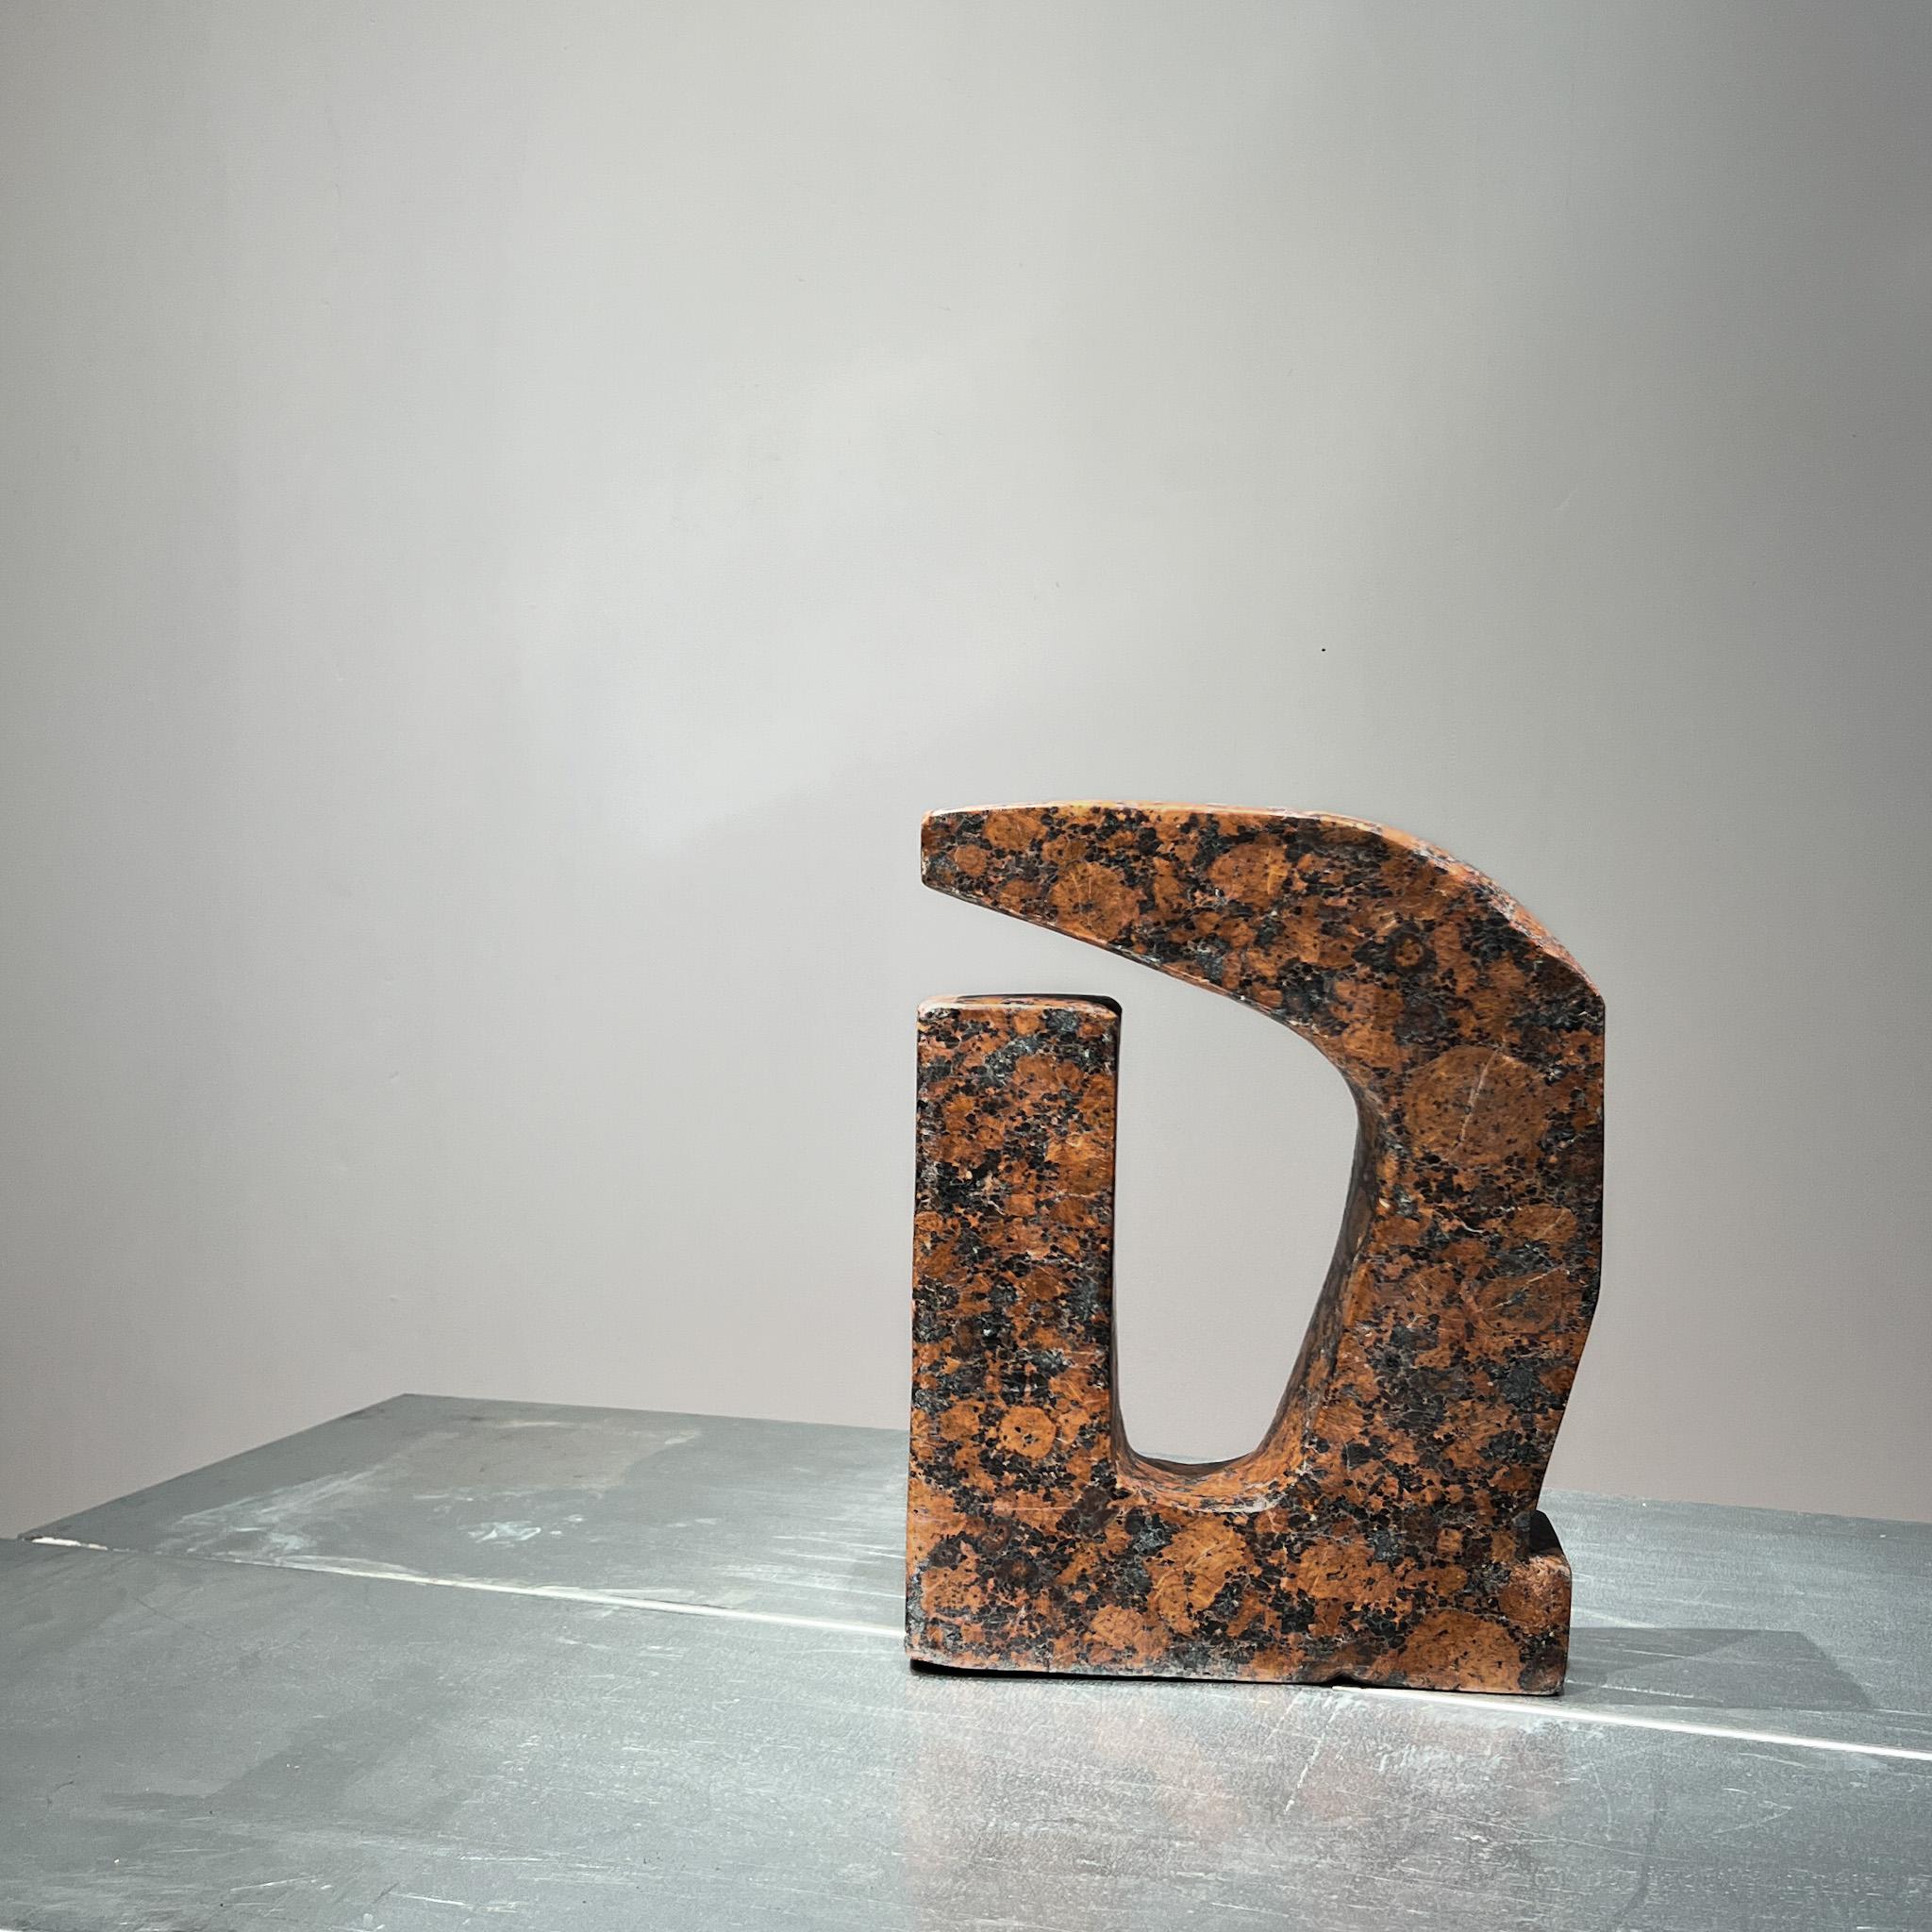 Mid-Century Modern Brutalist abstract sculpture in pink granite, Dutch, 1960s, Henry Moore style